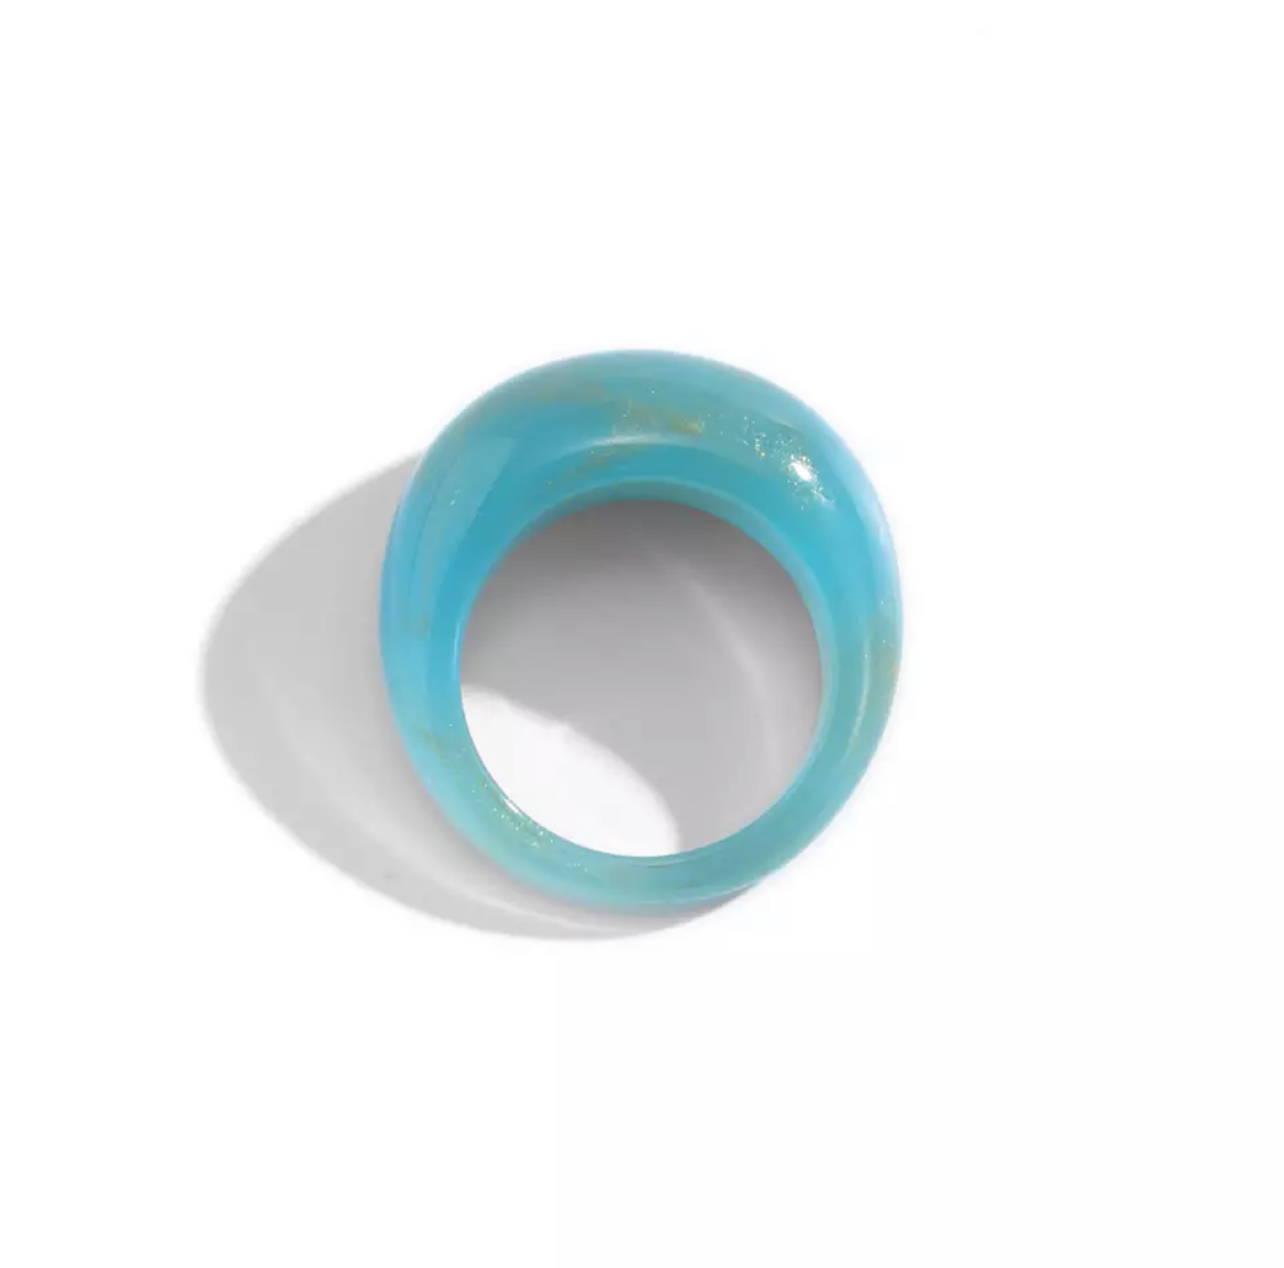 Hard Candy Round Rings